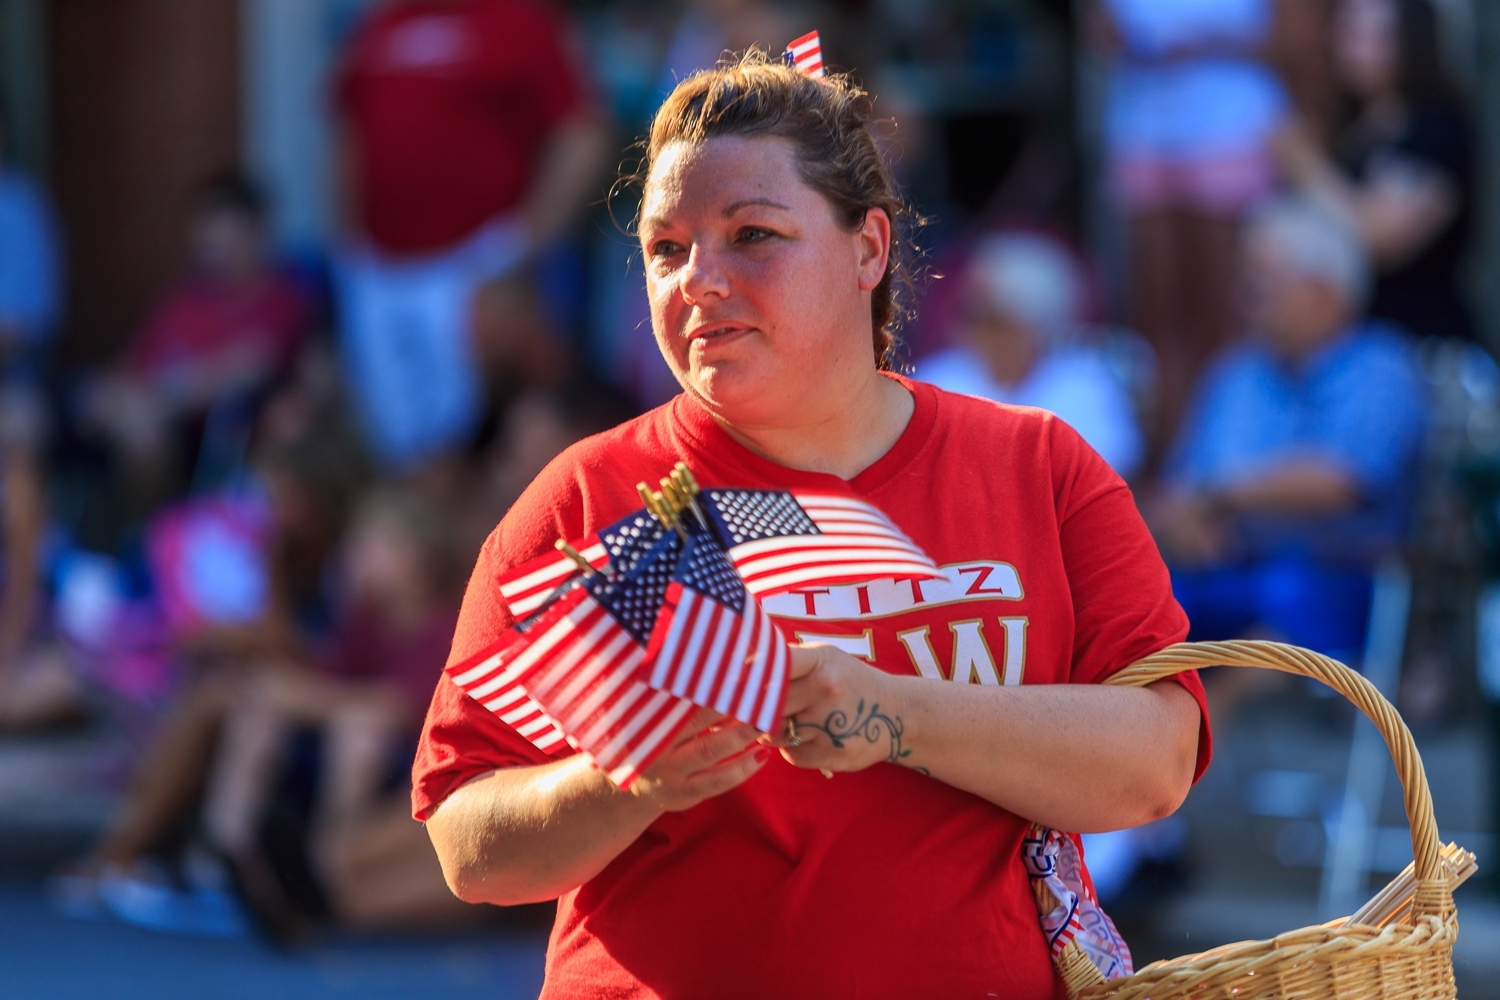 Lititz, PA / USA - July 3, 2017:   A woman hands out  US flags during a patriotic parade in a small American town at a 4th of July Independence Day celebration.